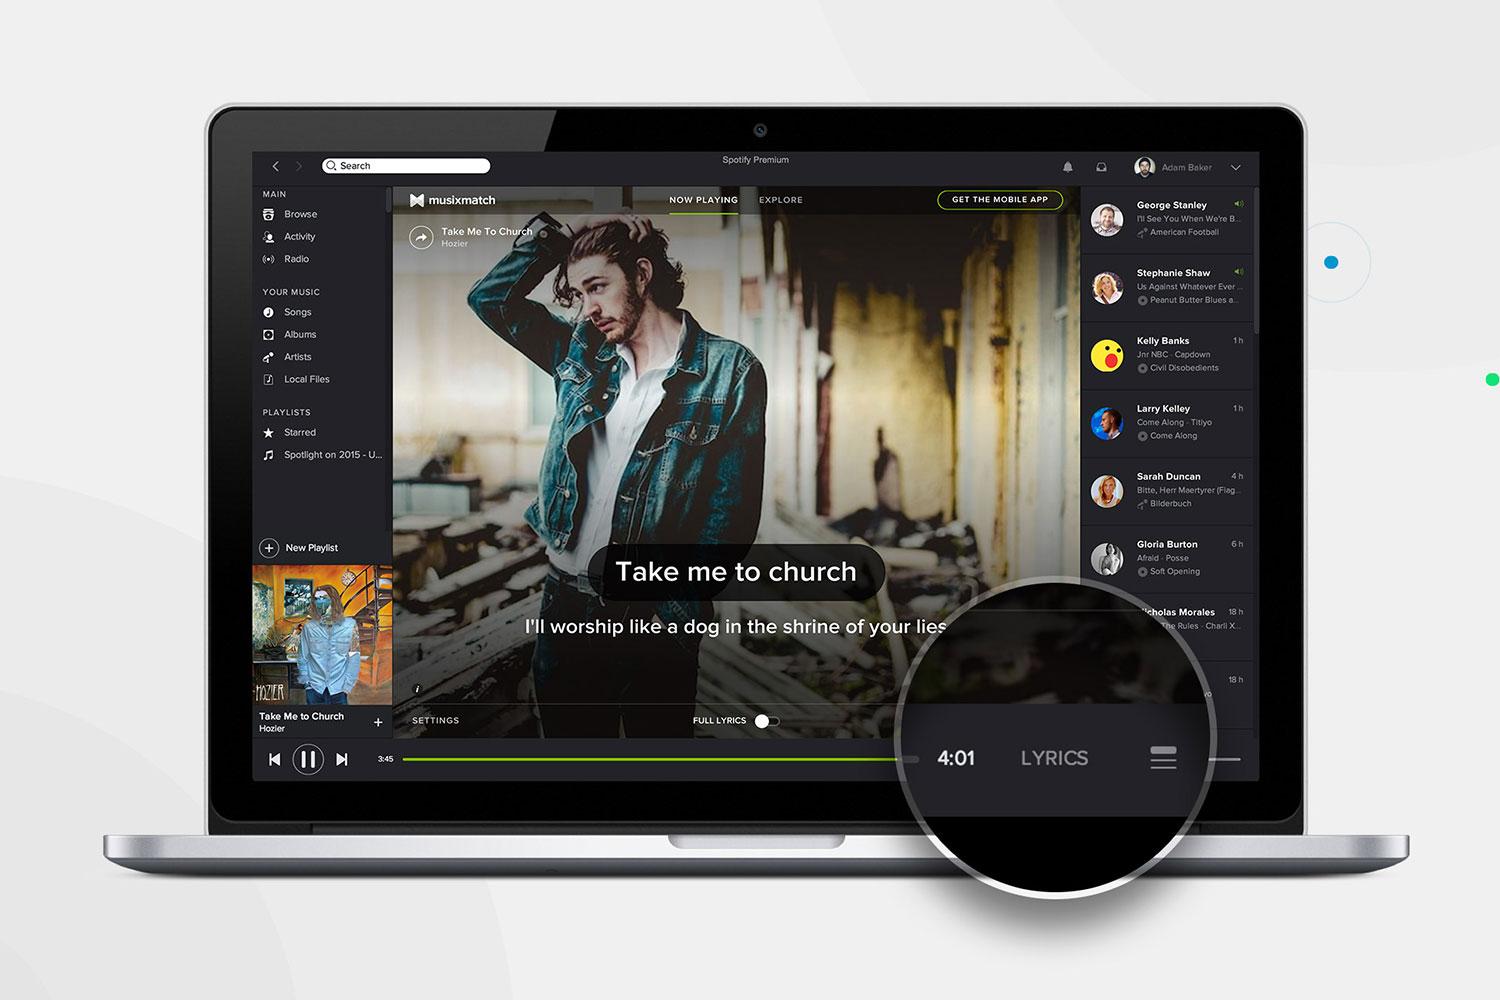 spotify adds lyrics to desktop app so you can annoy the hell out of everyone nearby hozier edit press image